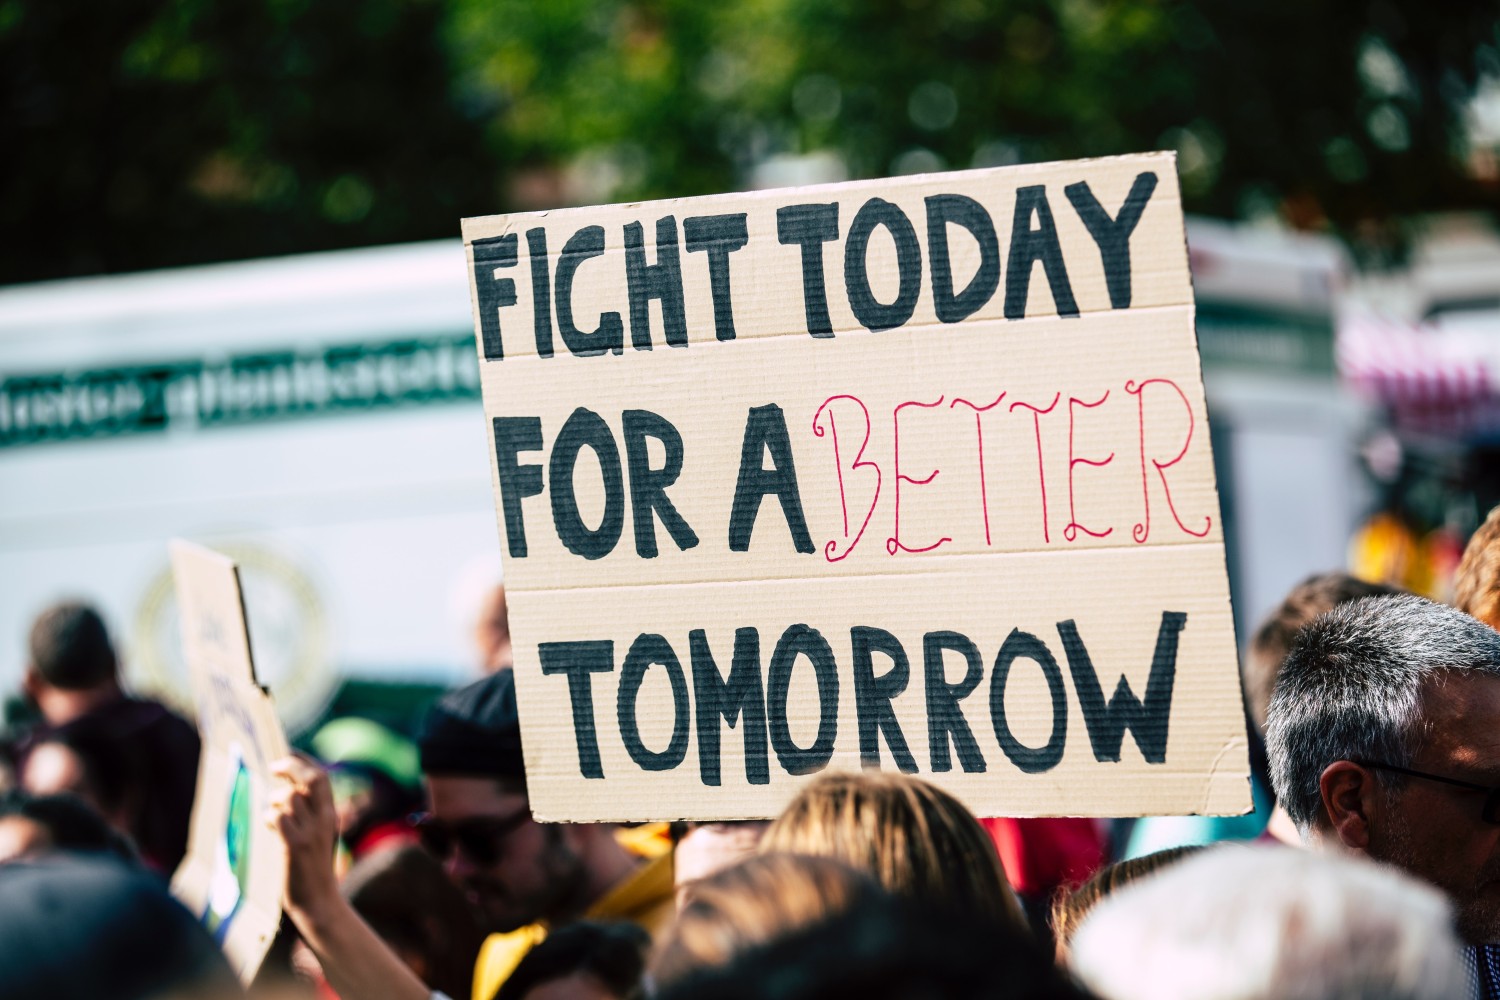 Sign that says "fight today for a better tomorrow"